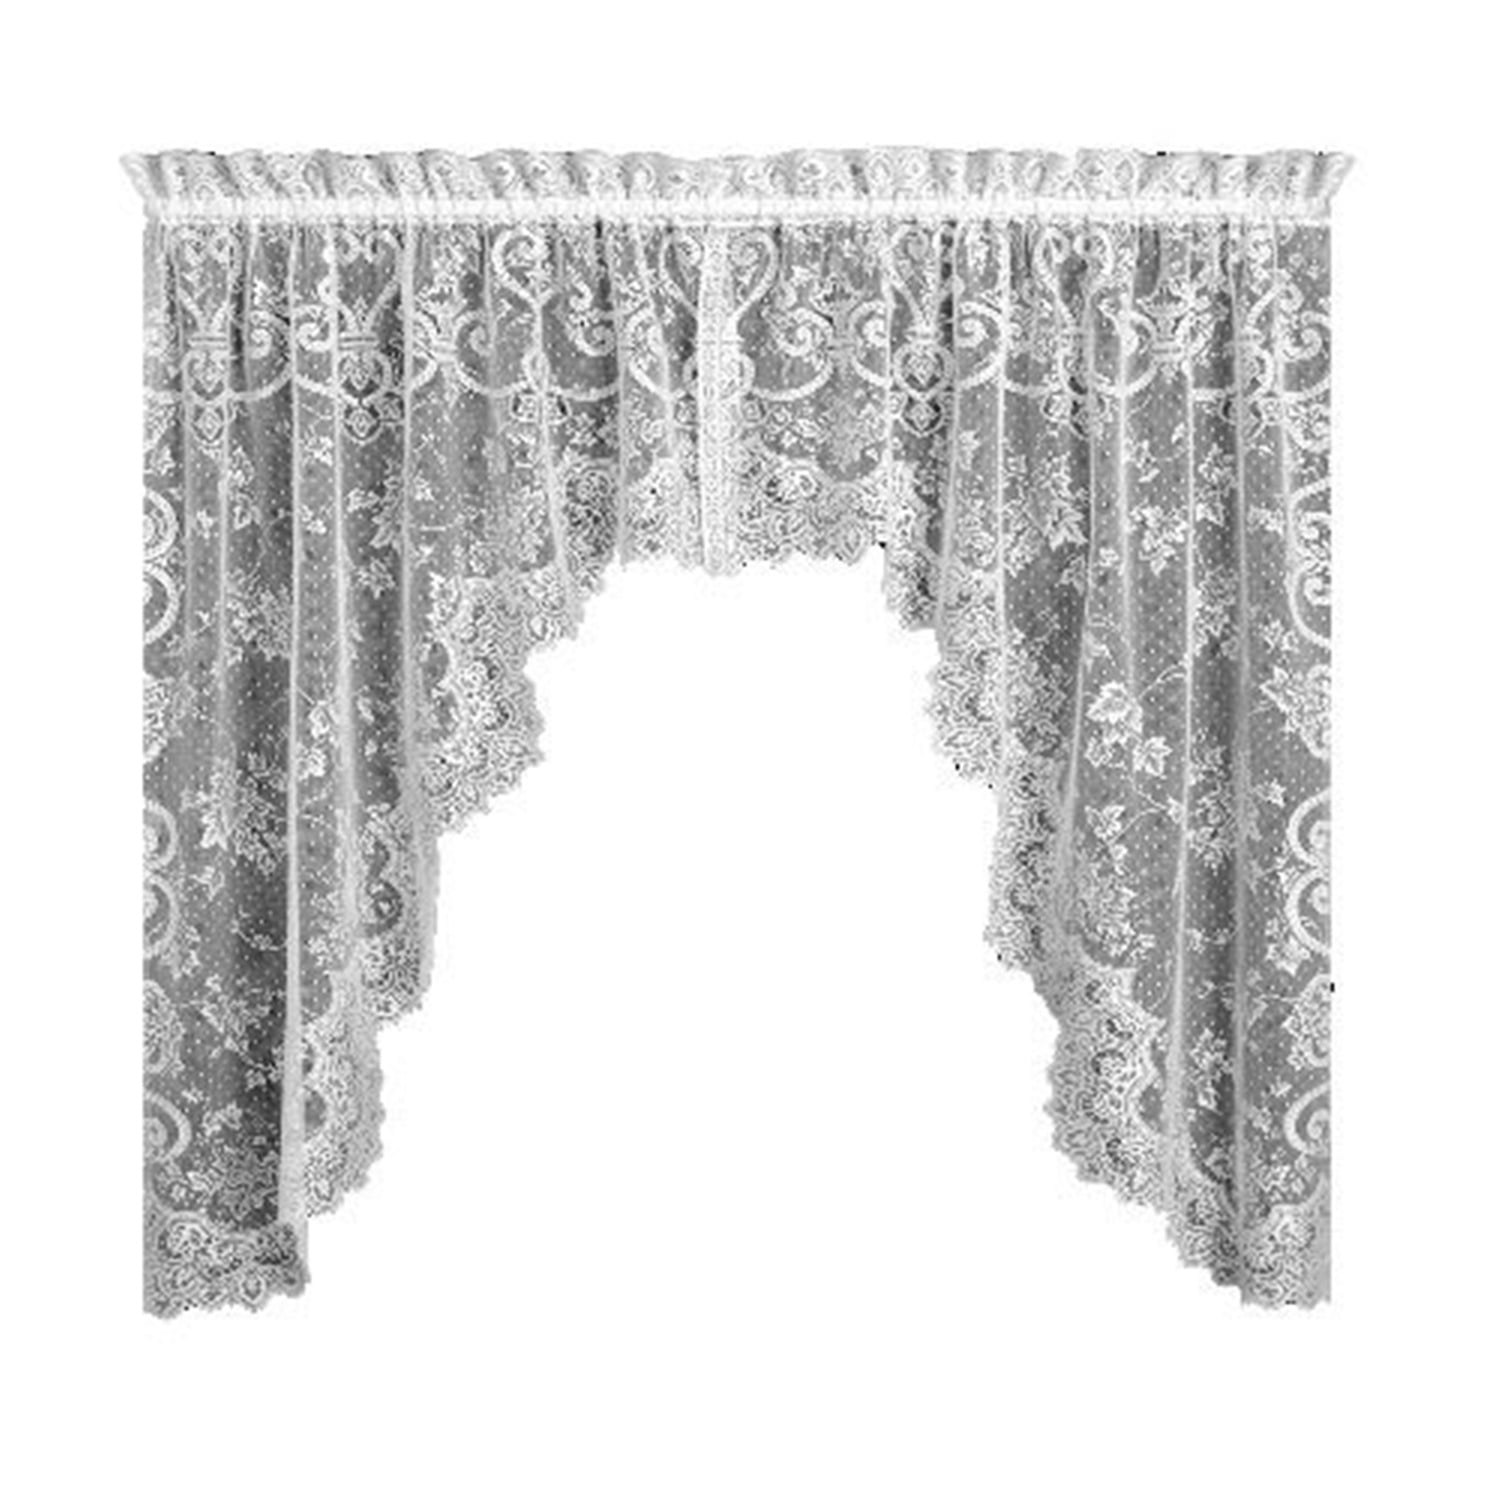 Made in USA! 60"W x 22"L Heritage Lace White ENGLISH IVY Window Valance 